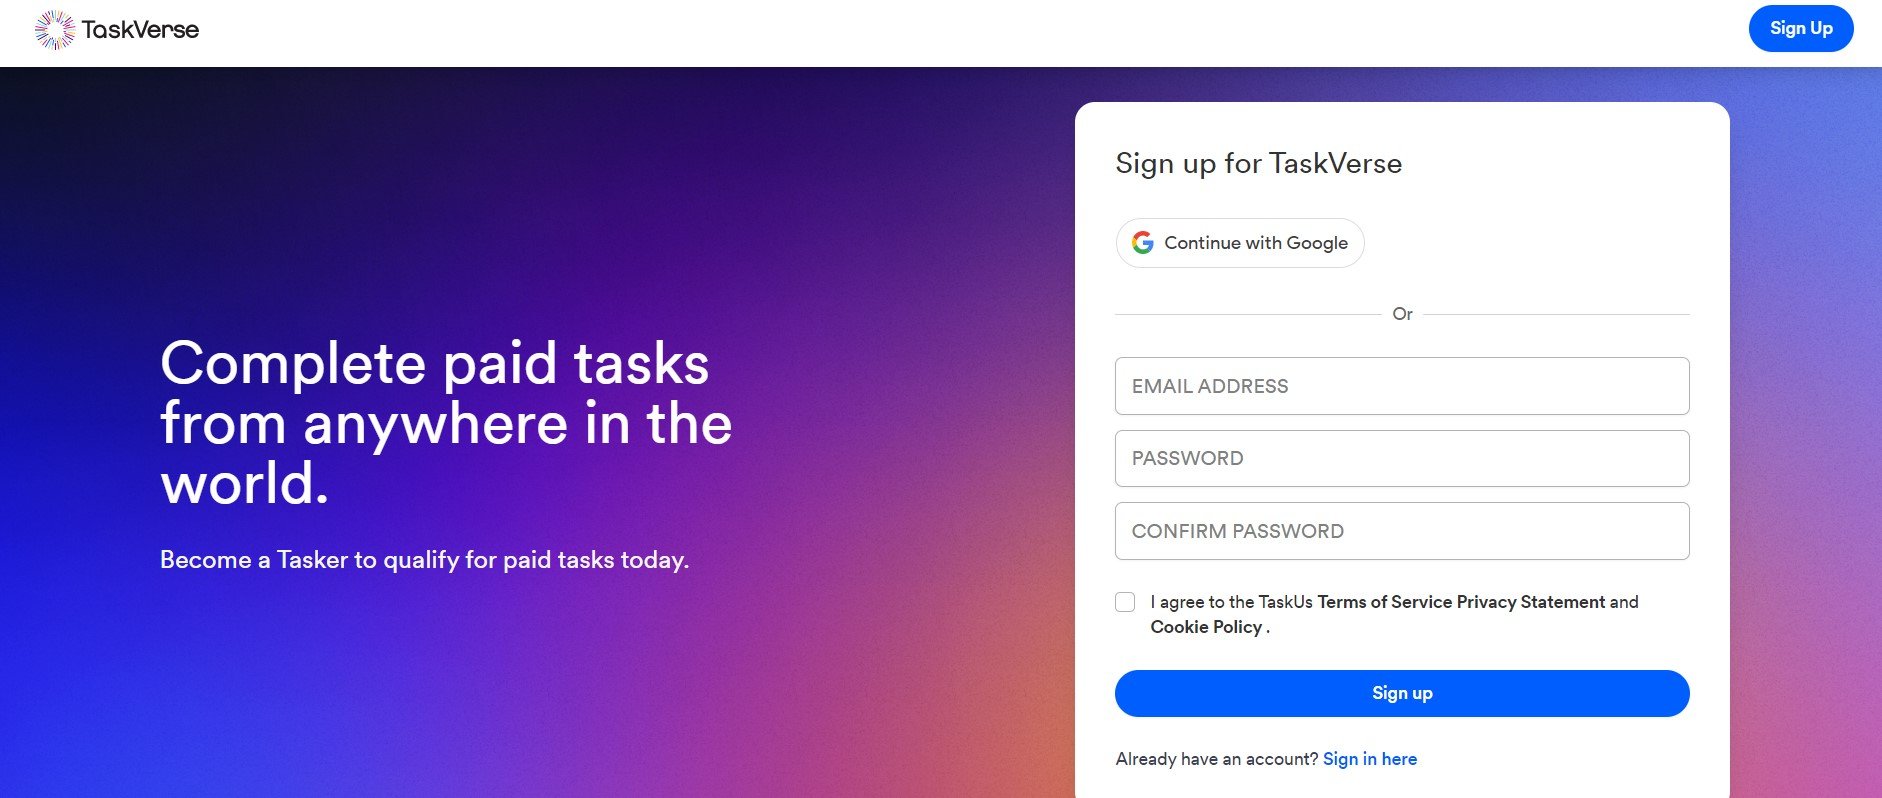 How to signup TaskVerse?